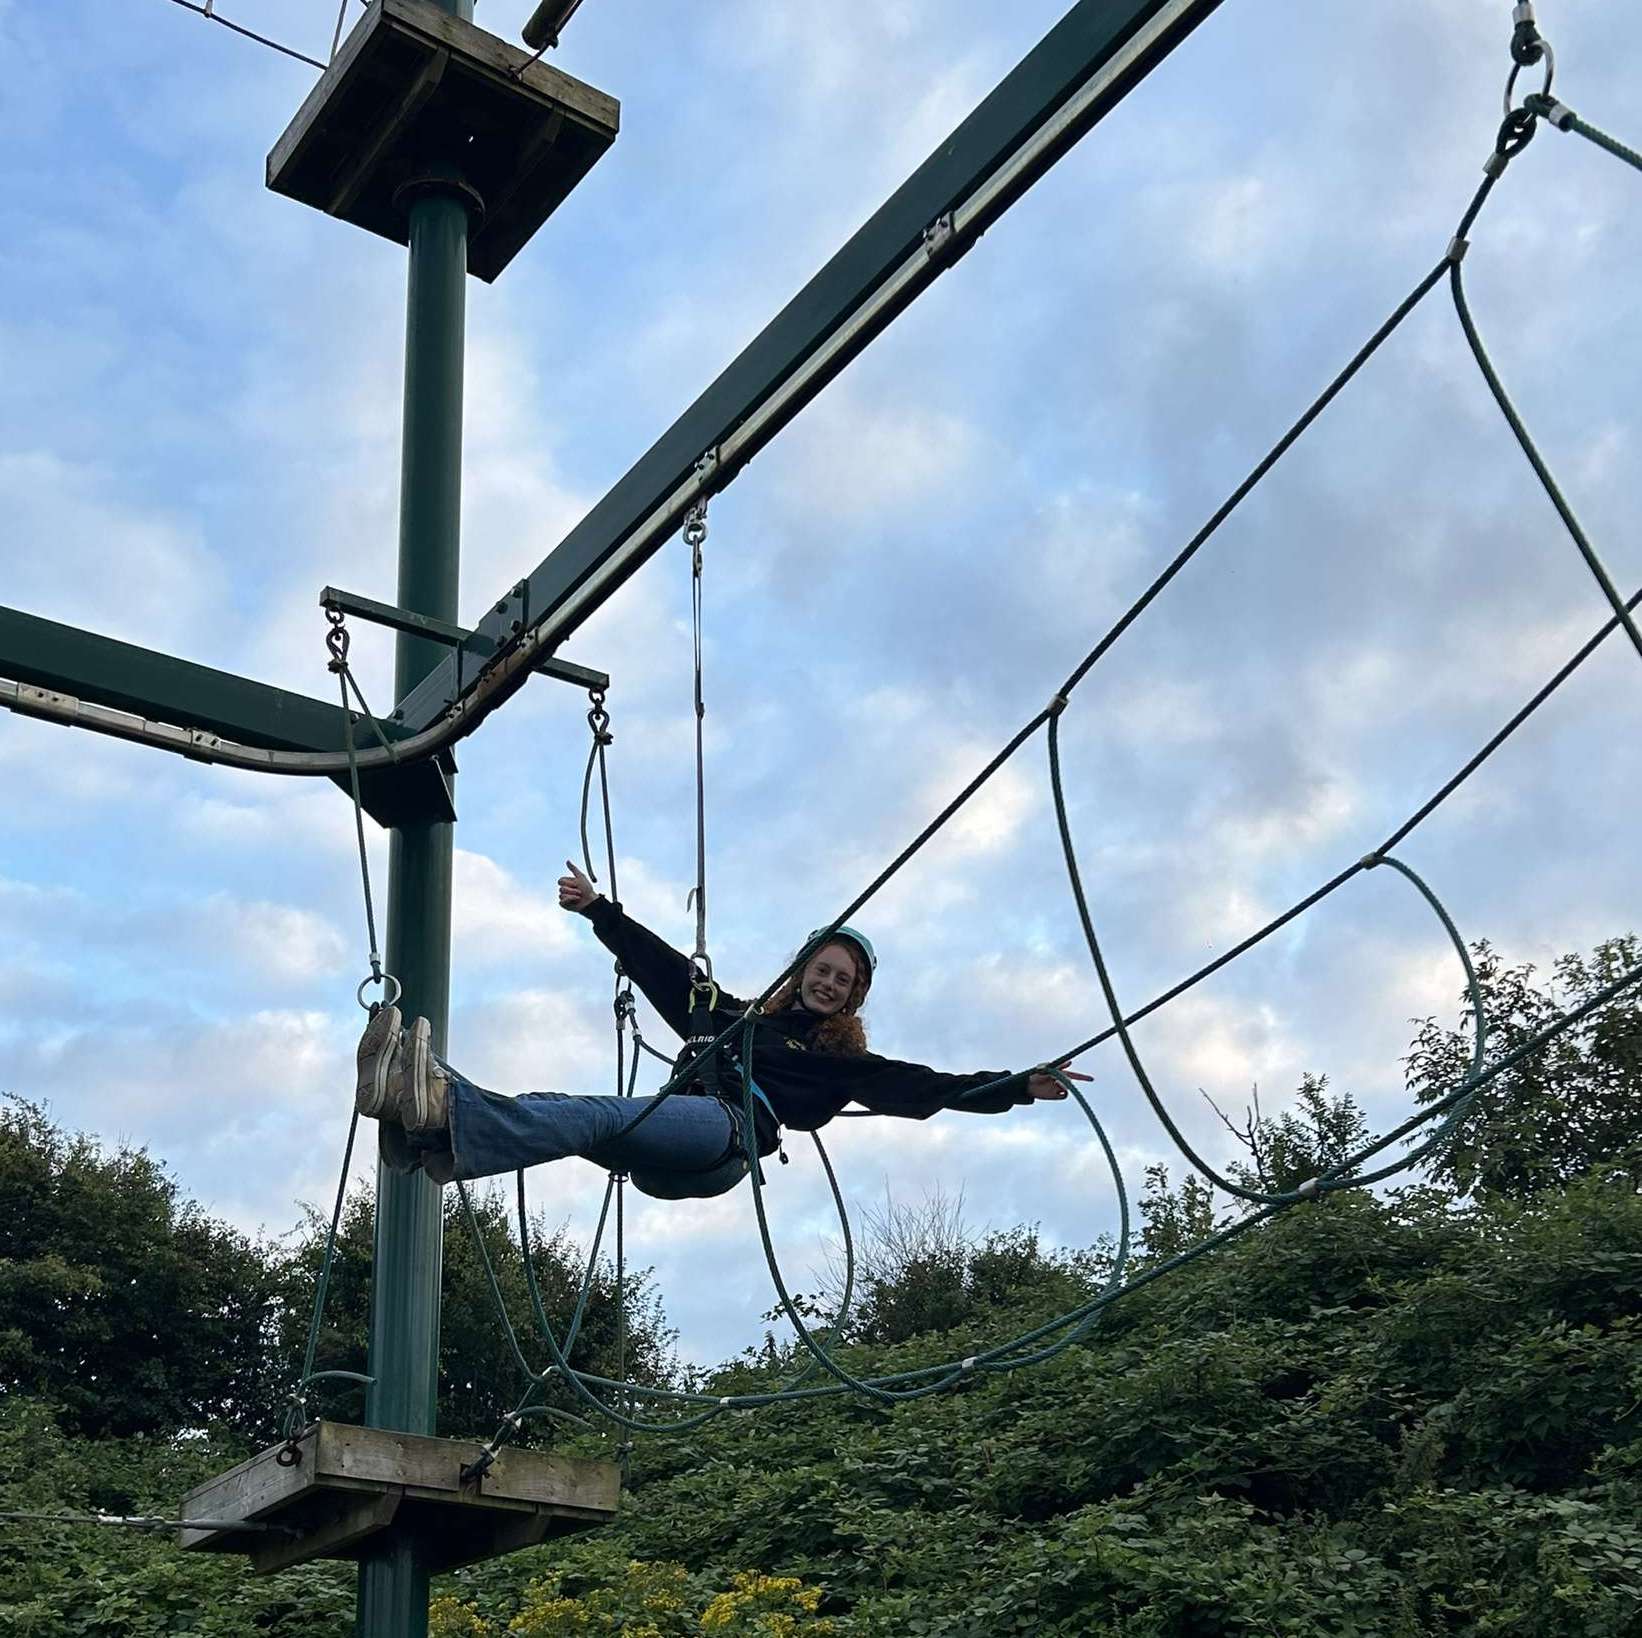  Lilla, a white young person, sits mid-air with her legs in front of her and her arms out wide and a big smile on her face on a high ropes course. She is attached with a safety rope which is fastened across her middle as well as also wearing a helmet